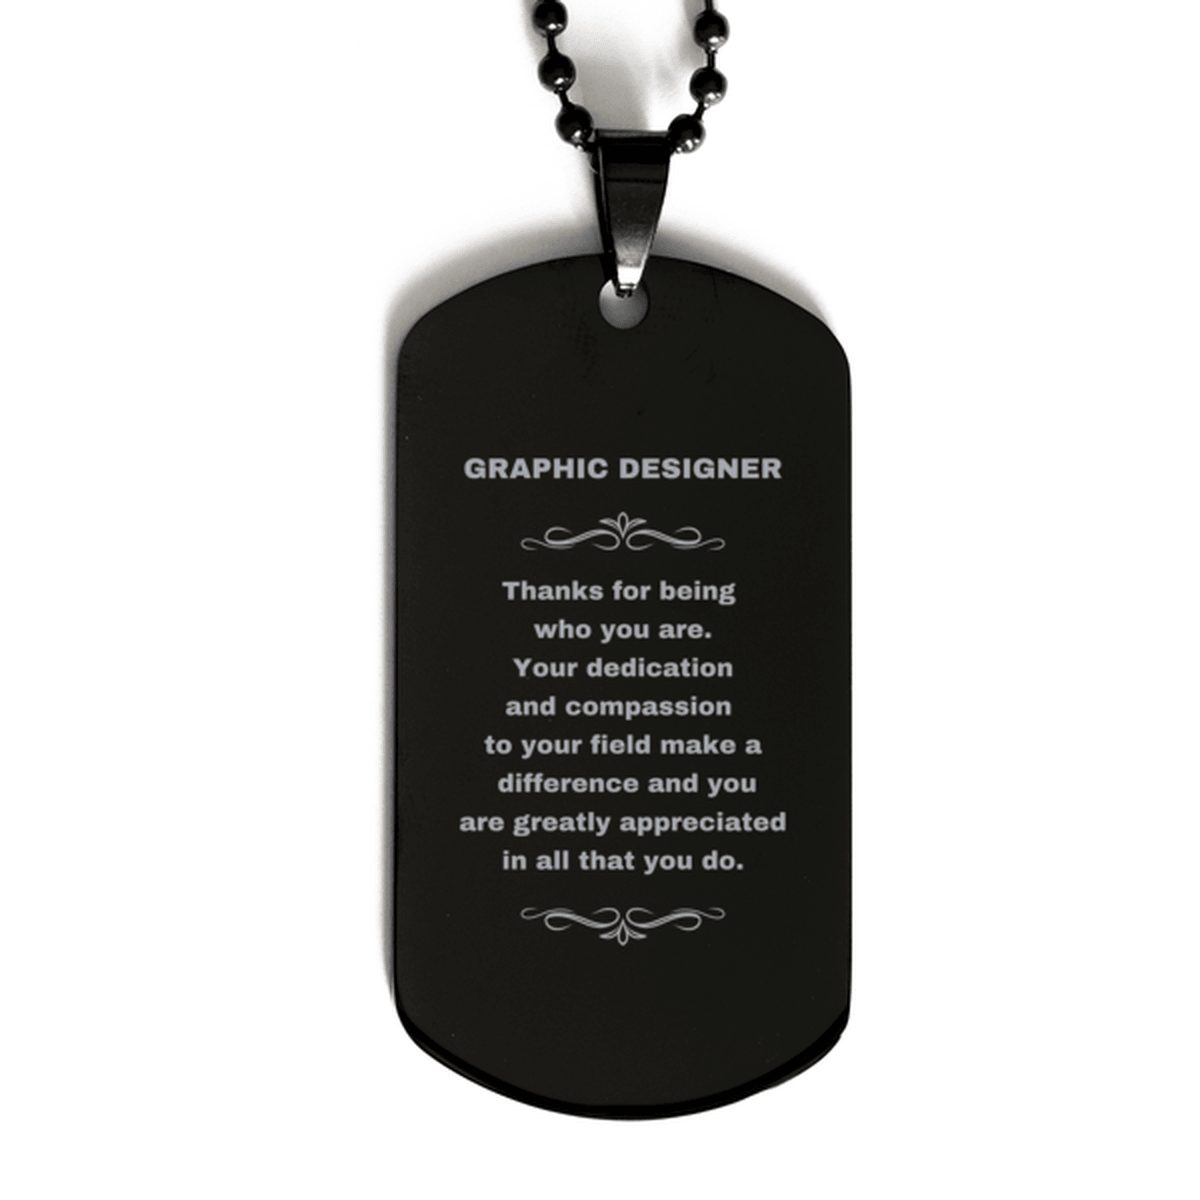 Graphic Designer Black Dog Tag Necklace Engraved Bracelet - Thanks for being who you are - Birthday Christmas Jewelry Gifts Coworkers Colleague Boss - Mallard Moon Gift Shop